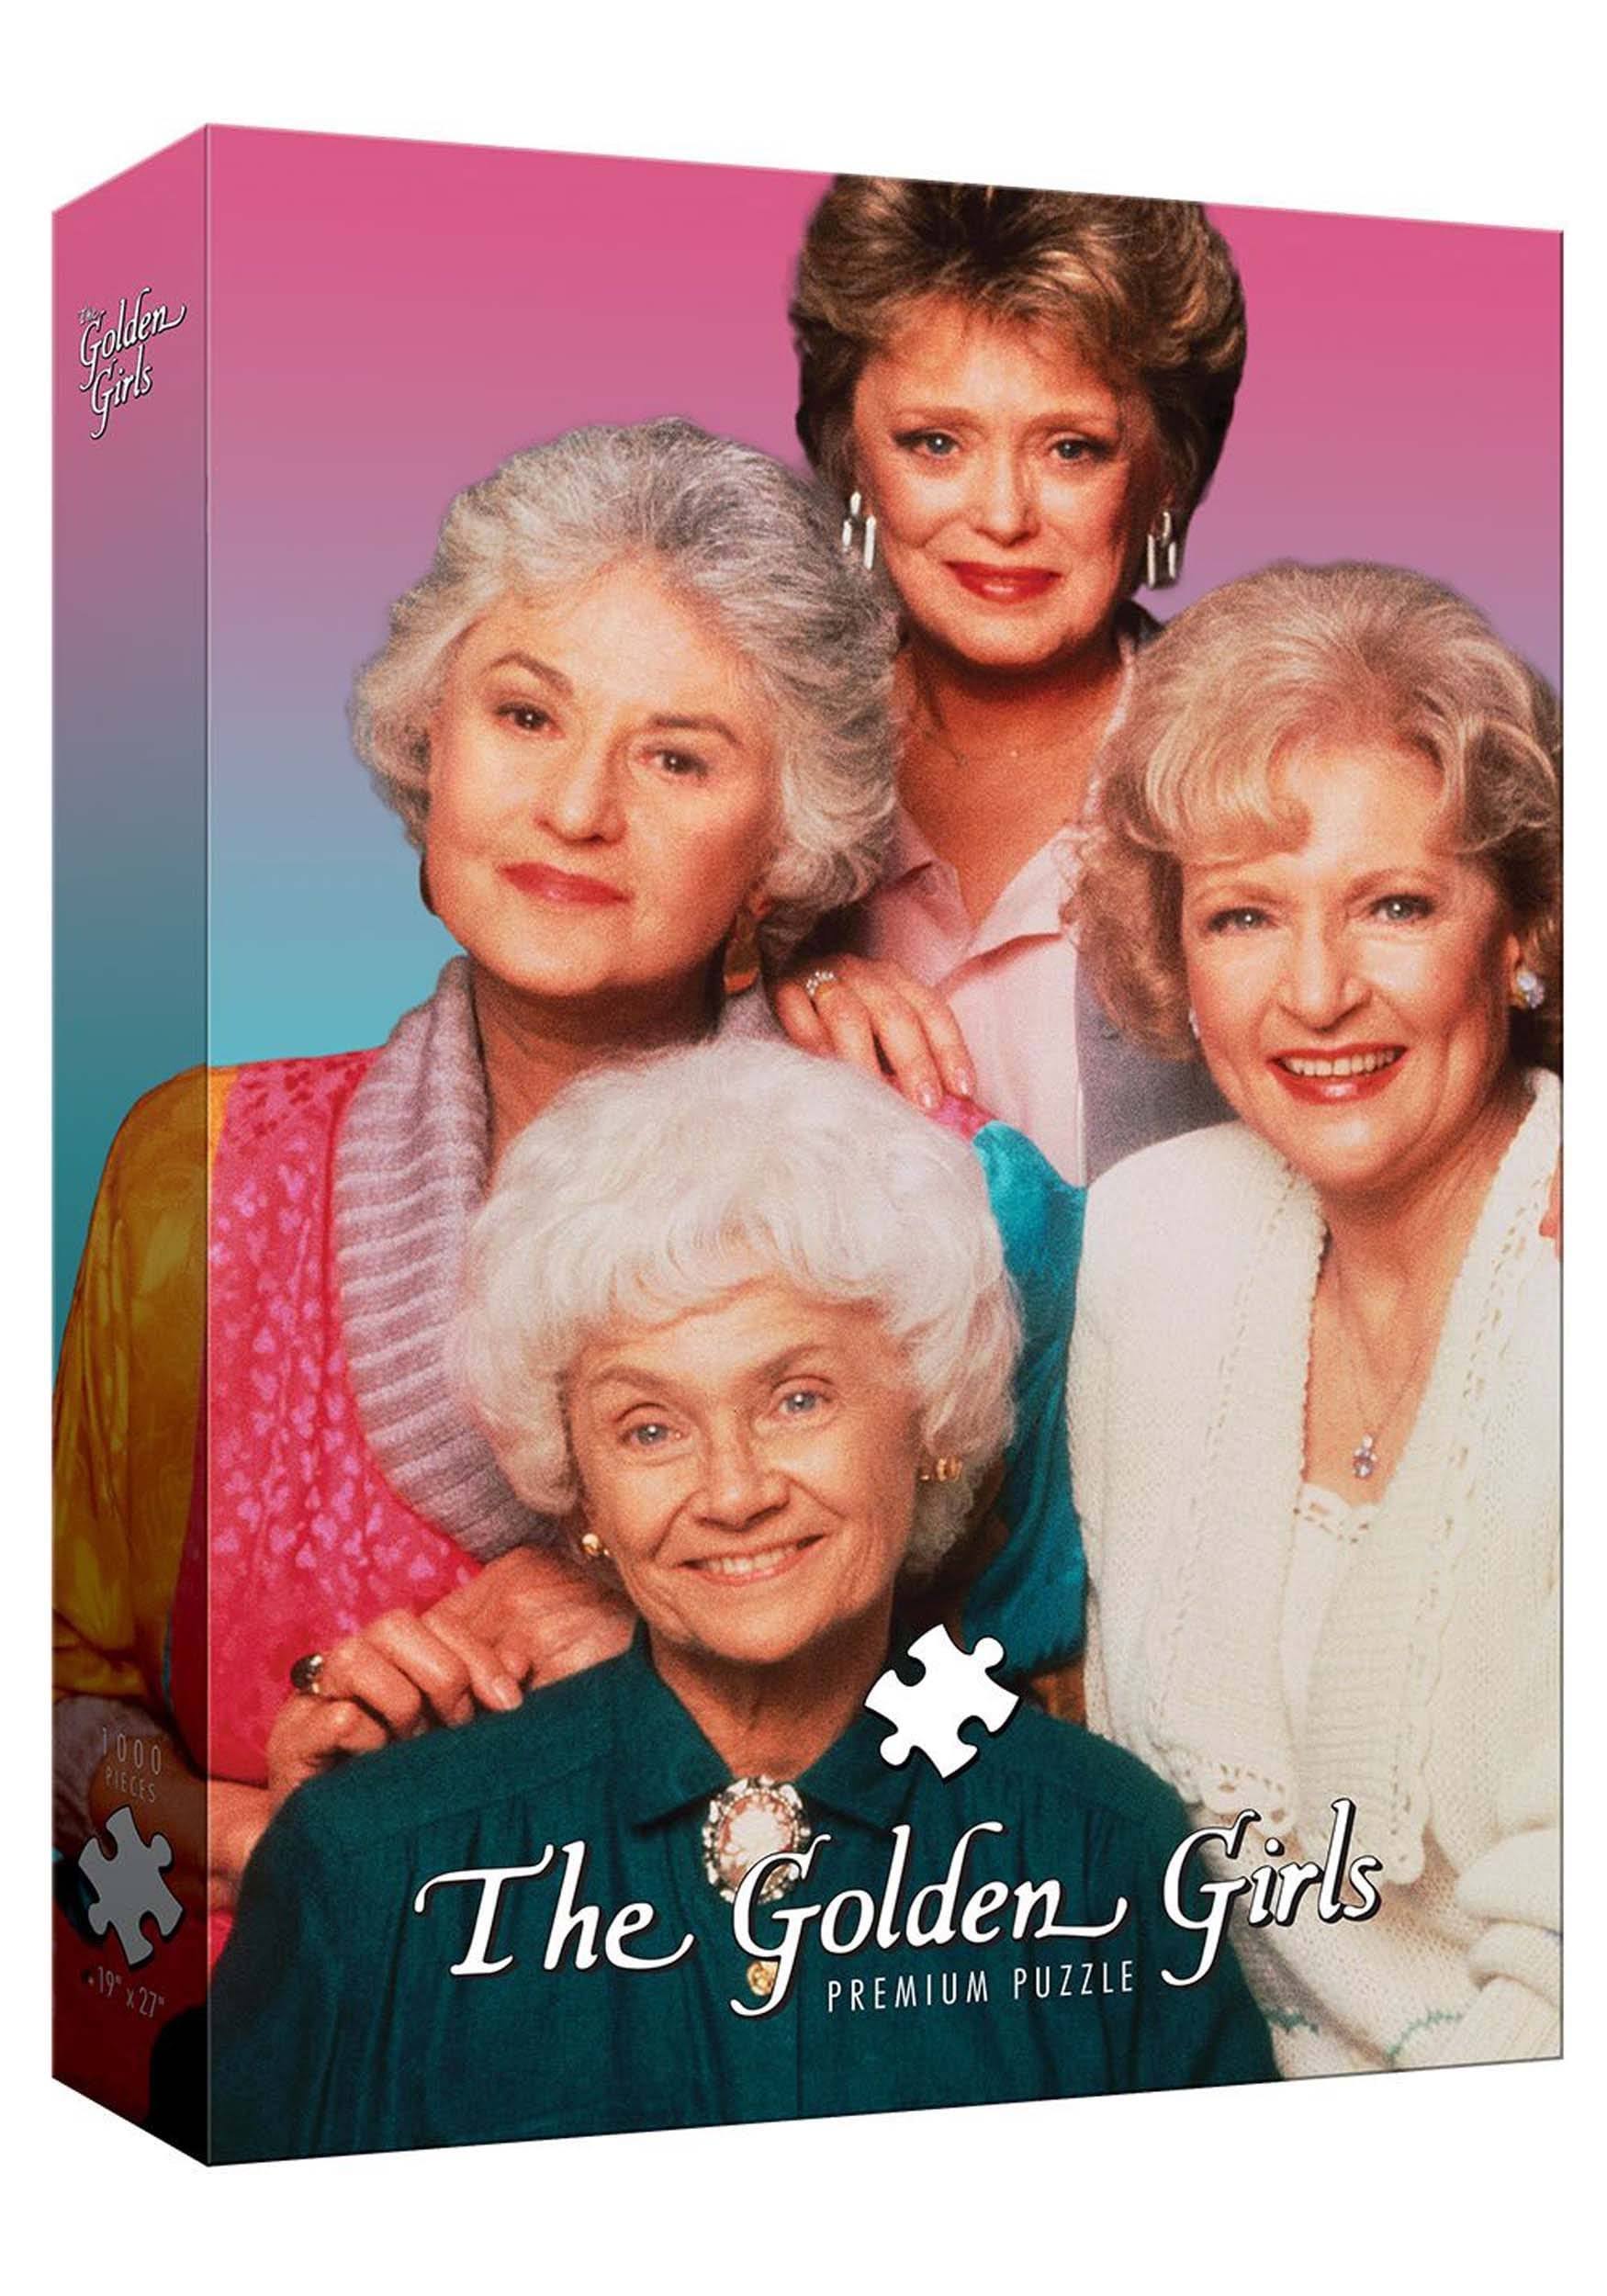 USAopoly The Golden Girls 1,000-Piece Puzzle